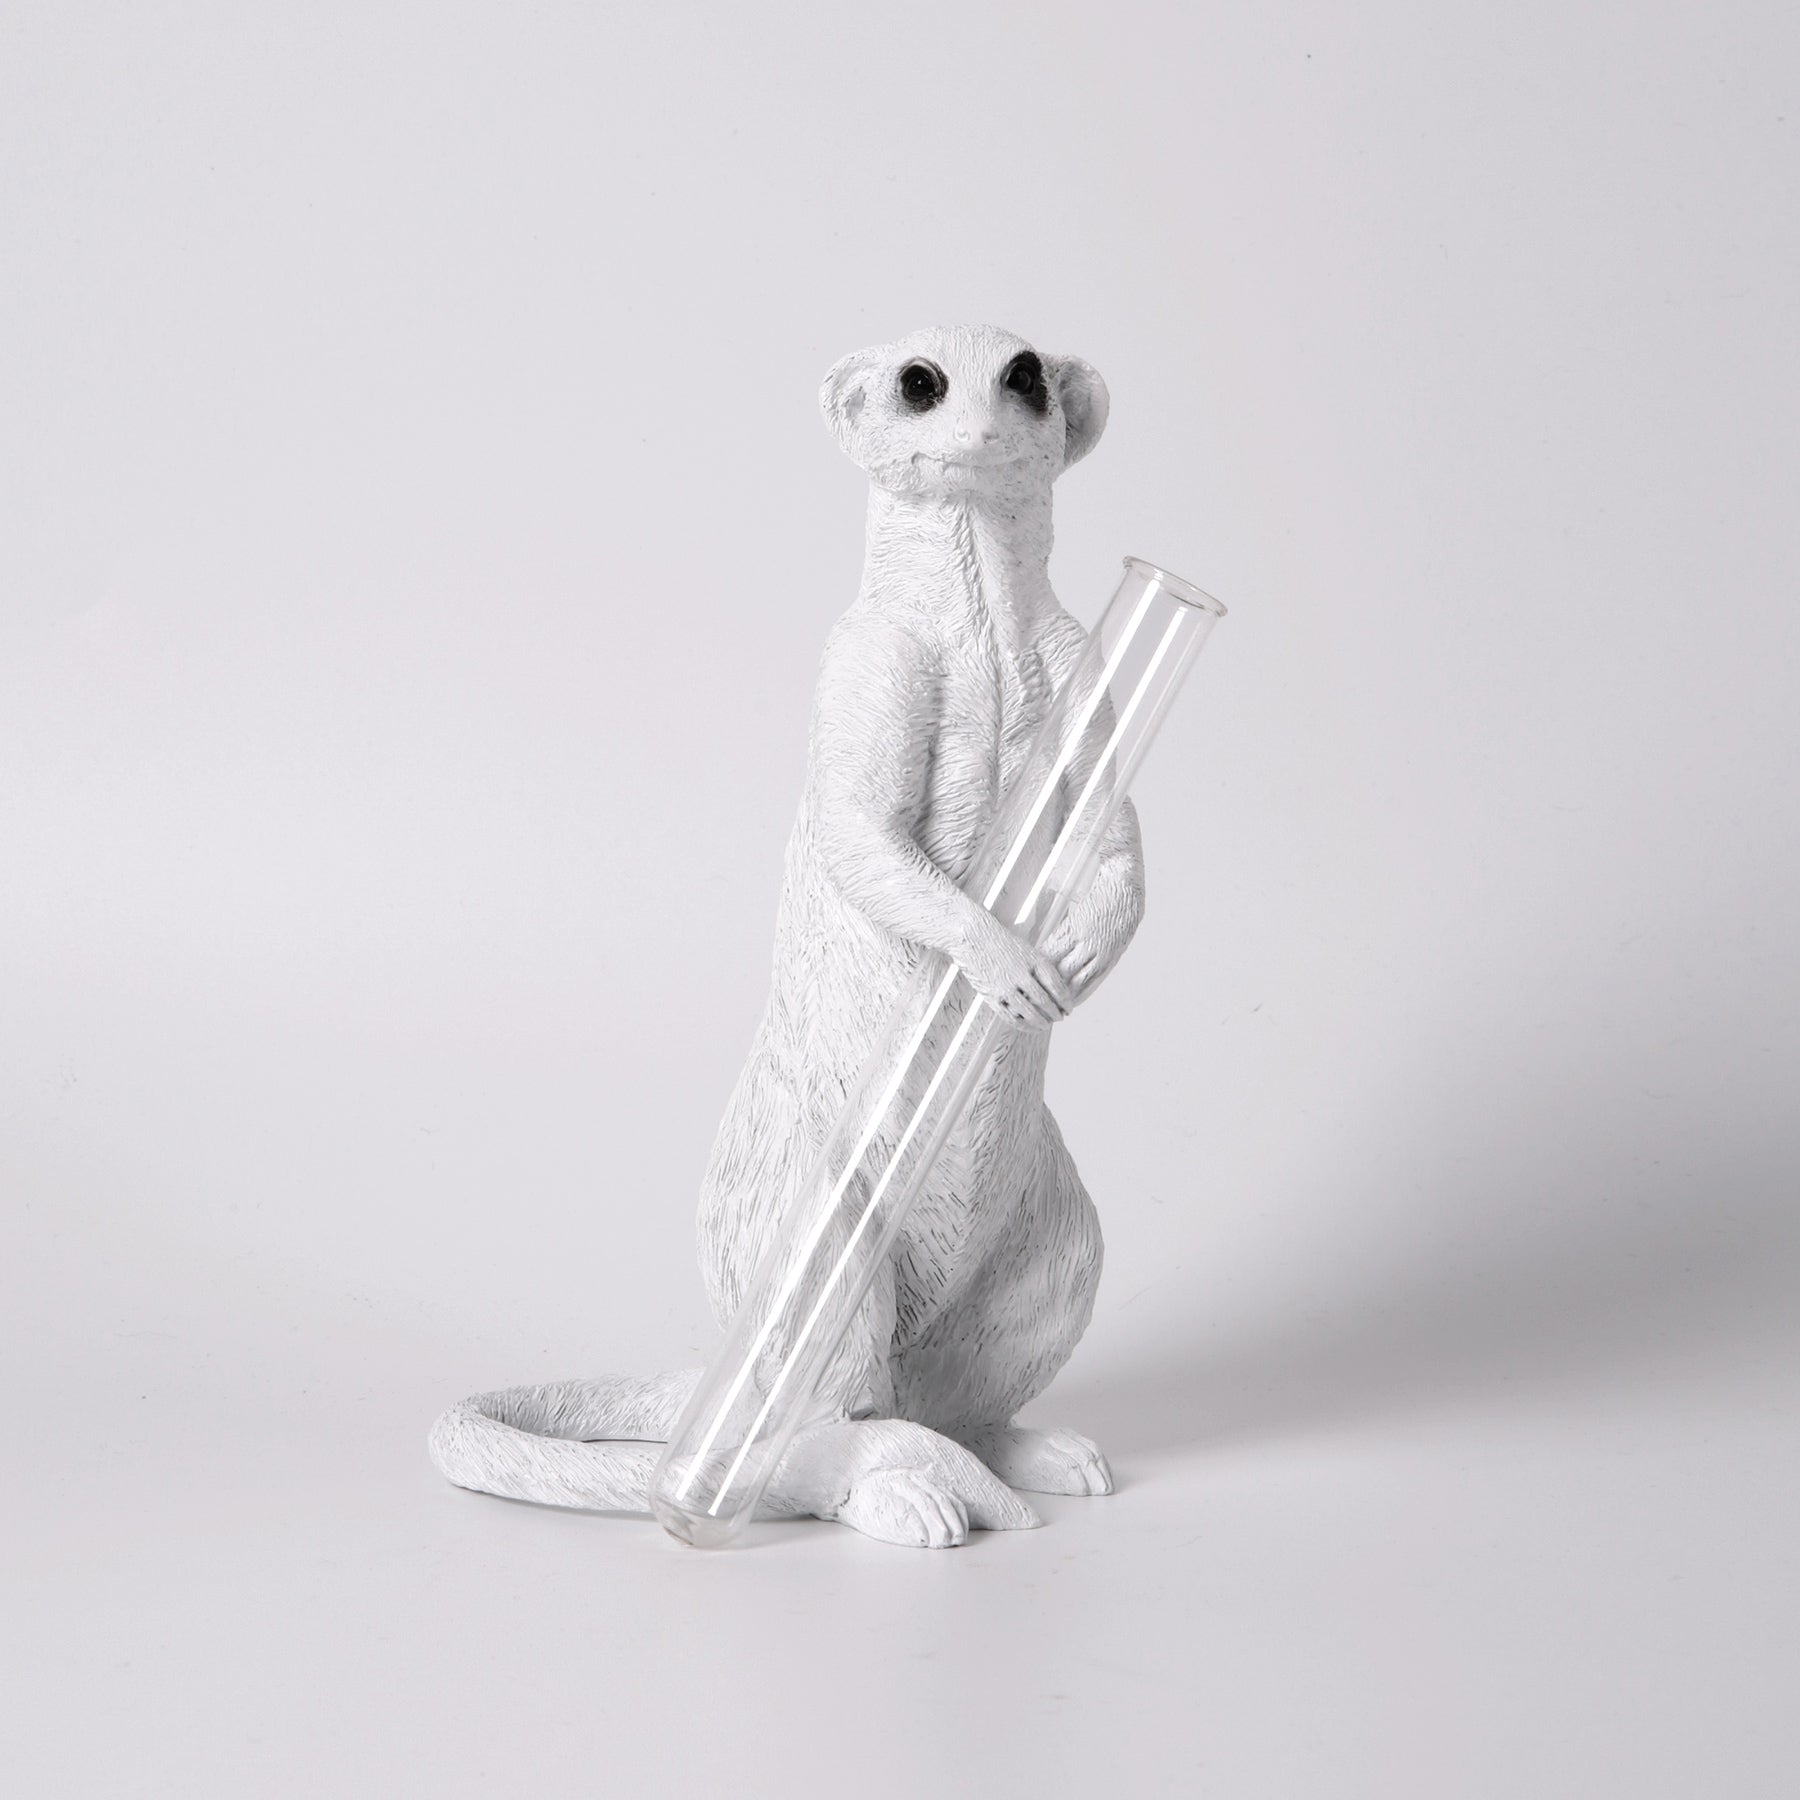 Celebrate the Christmas with Meerkats ornament & figurines!